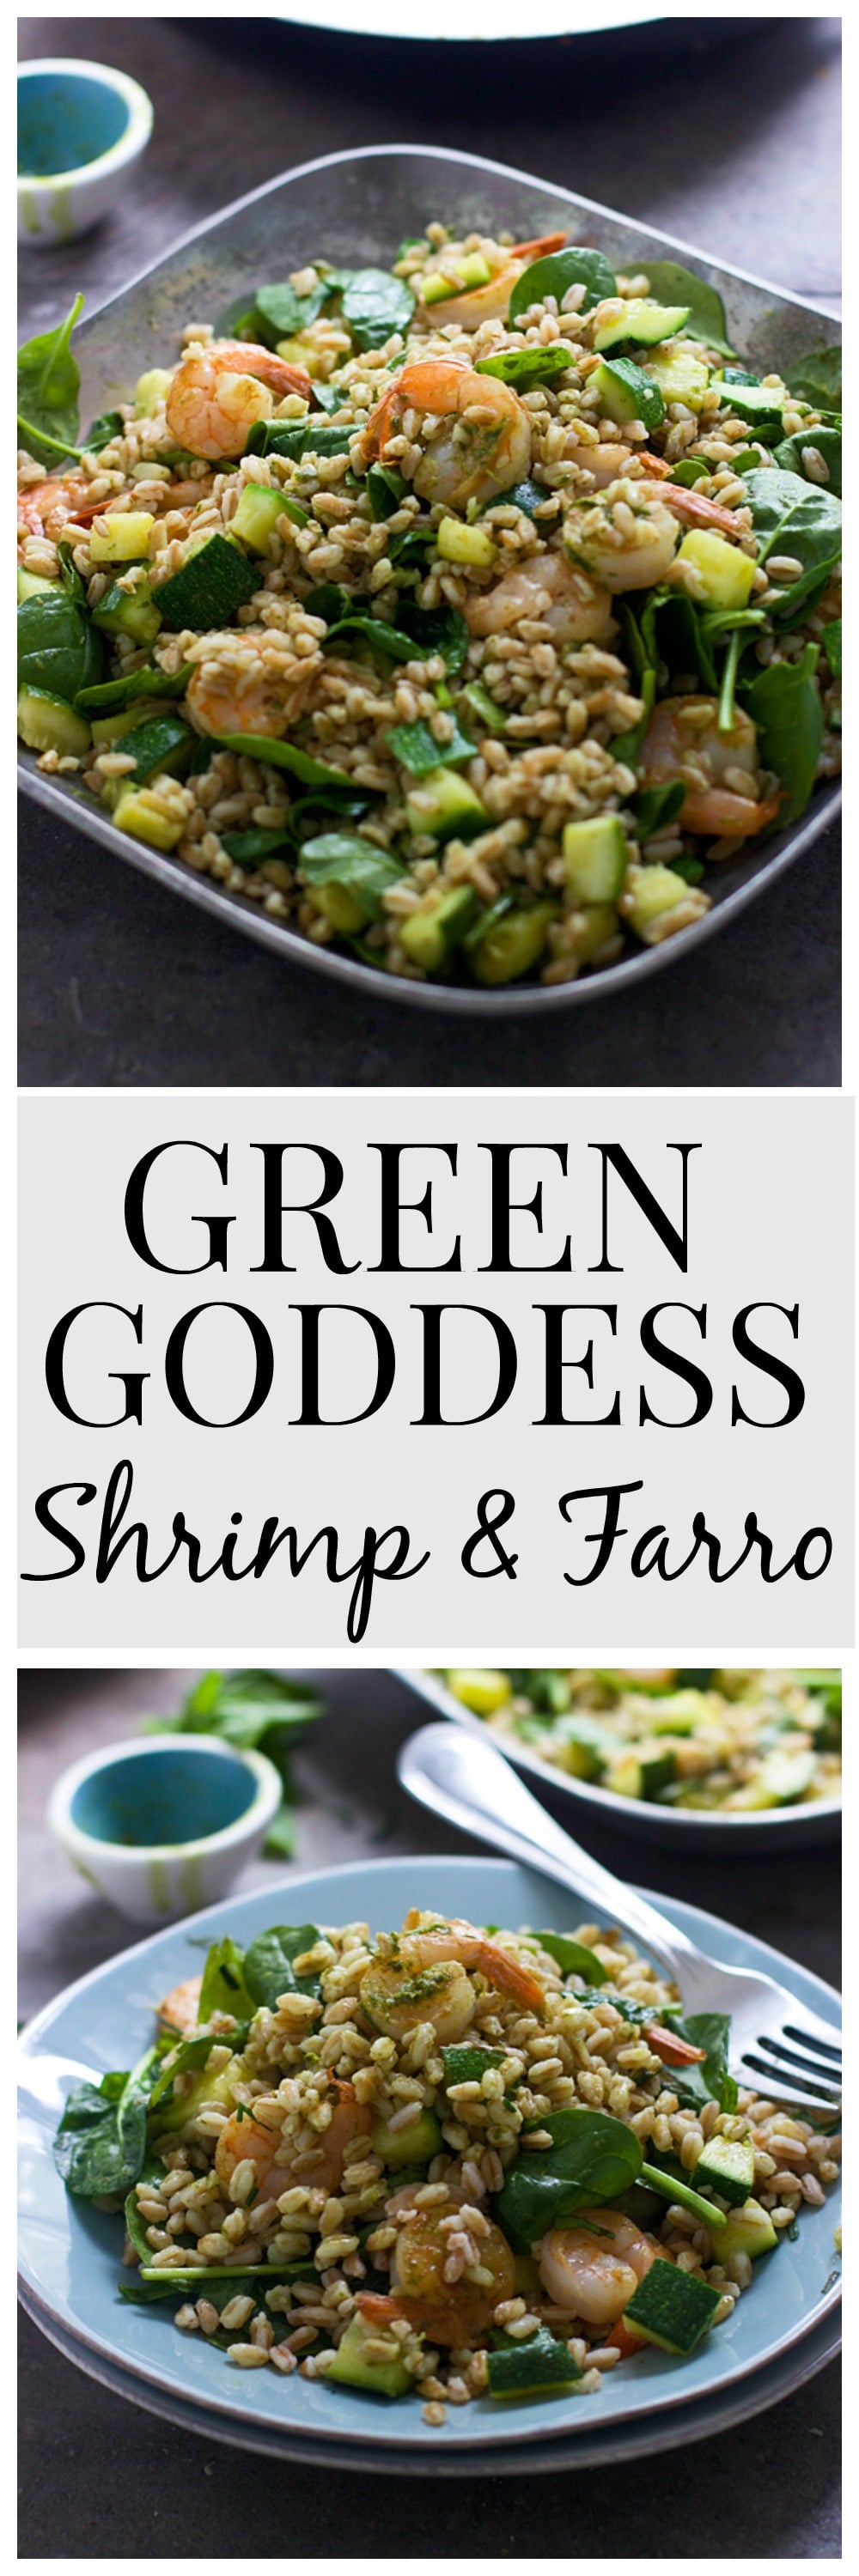 Green Goddess Shrimp and Farro - A super healthy, flavorful summer meal!